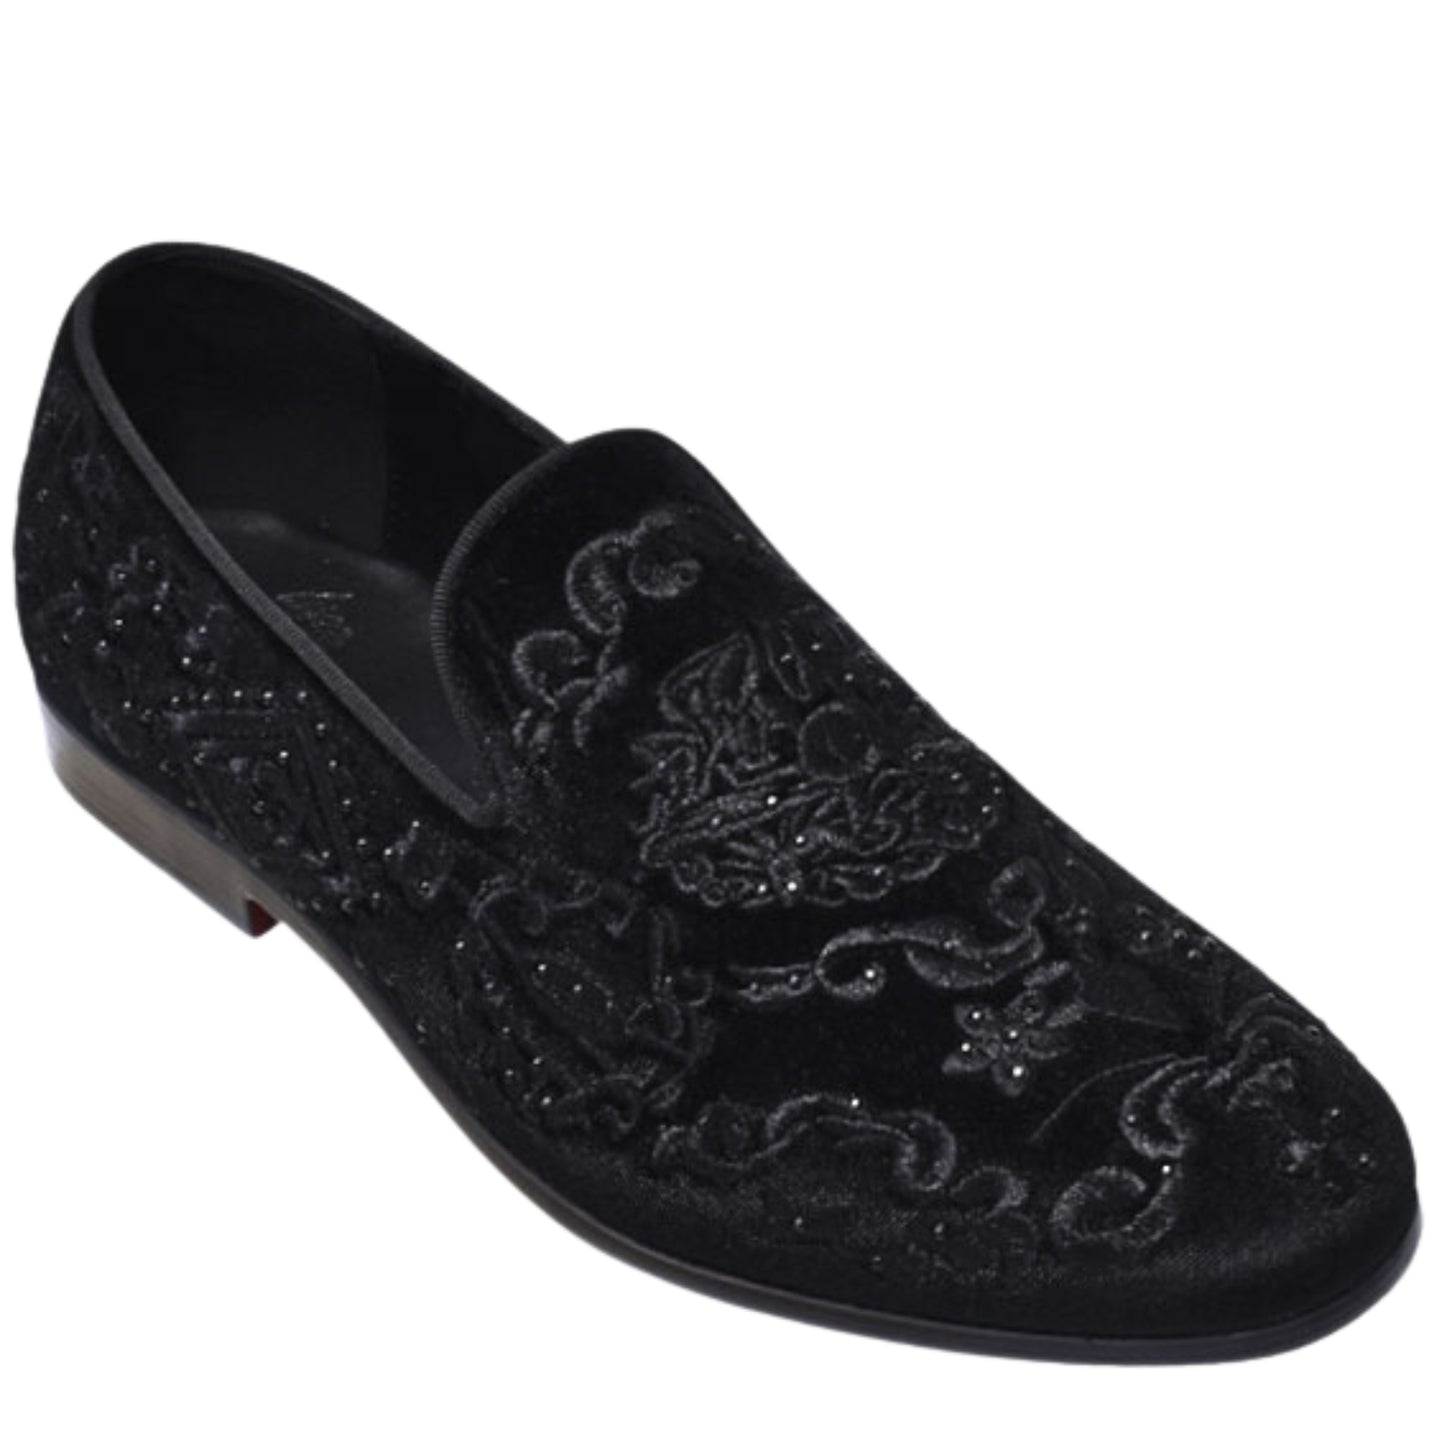  A close-up view of KCT Menswear's Paisley Black Velvet Loafers, showcasing the intricate paisley pattern, rich velvet material, and stunning black stones - perfect for a refined and luxurious appearance at any formal event.